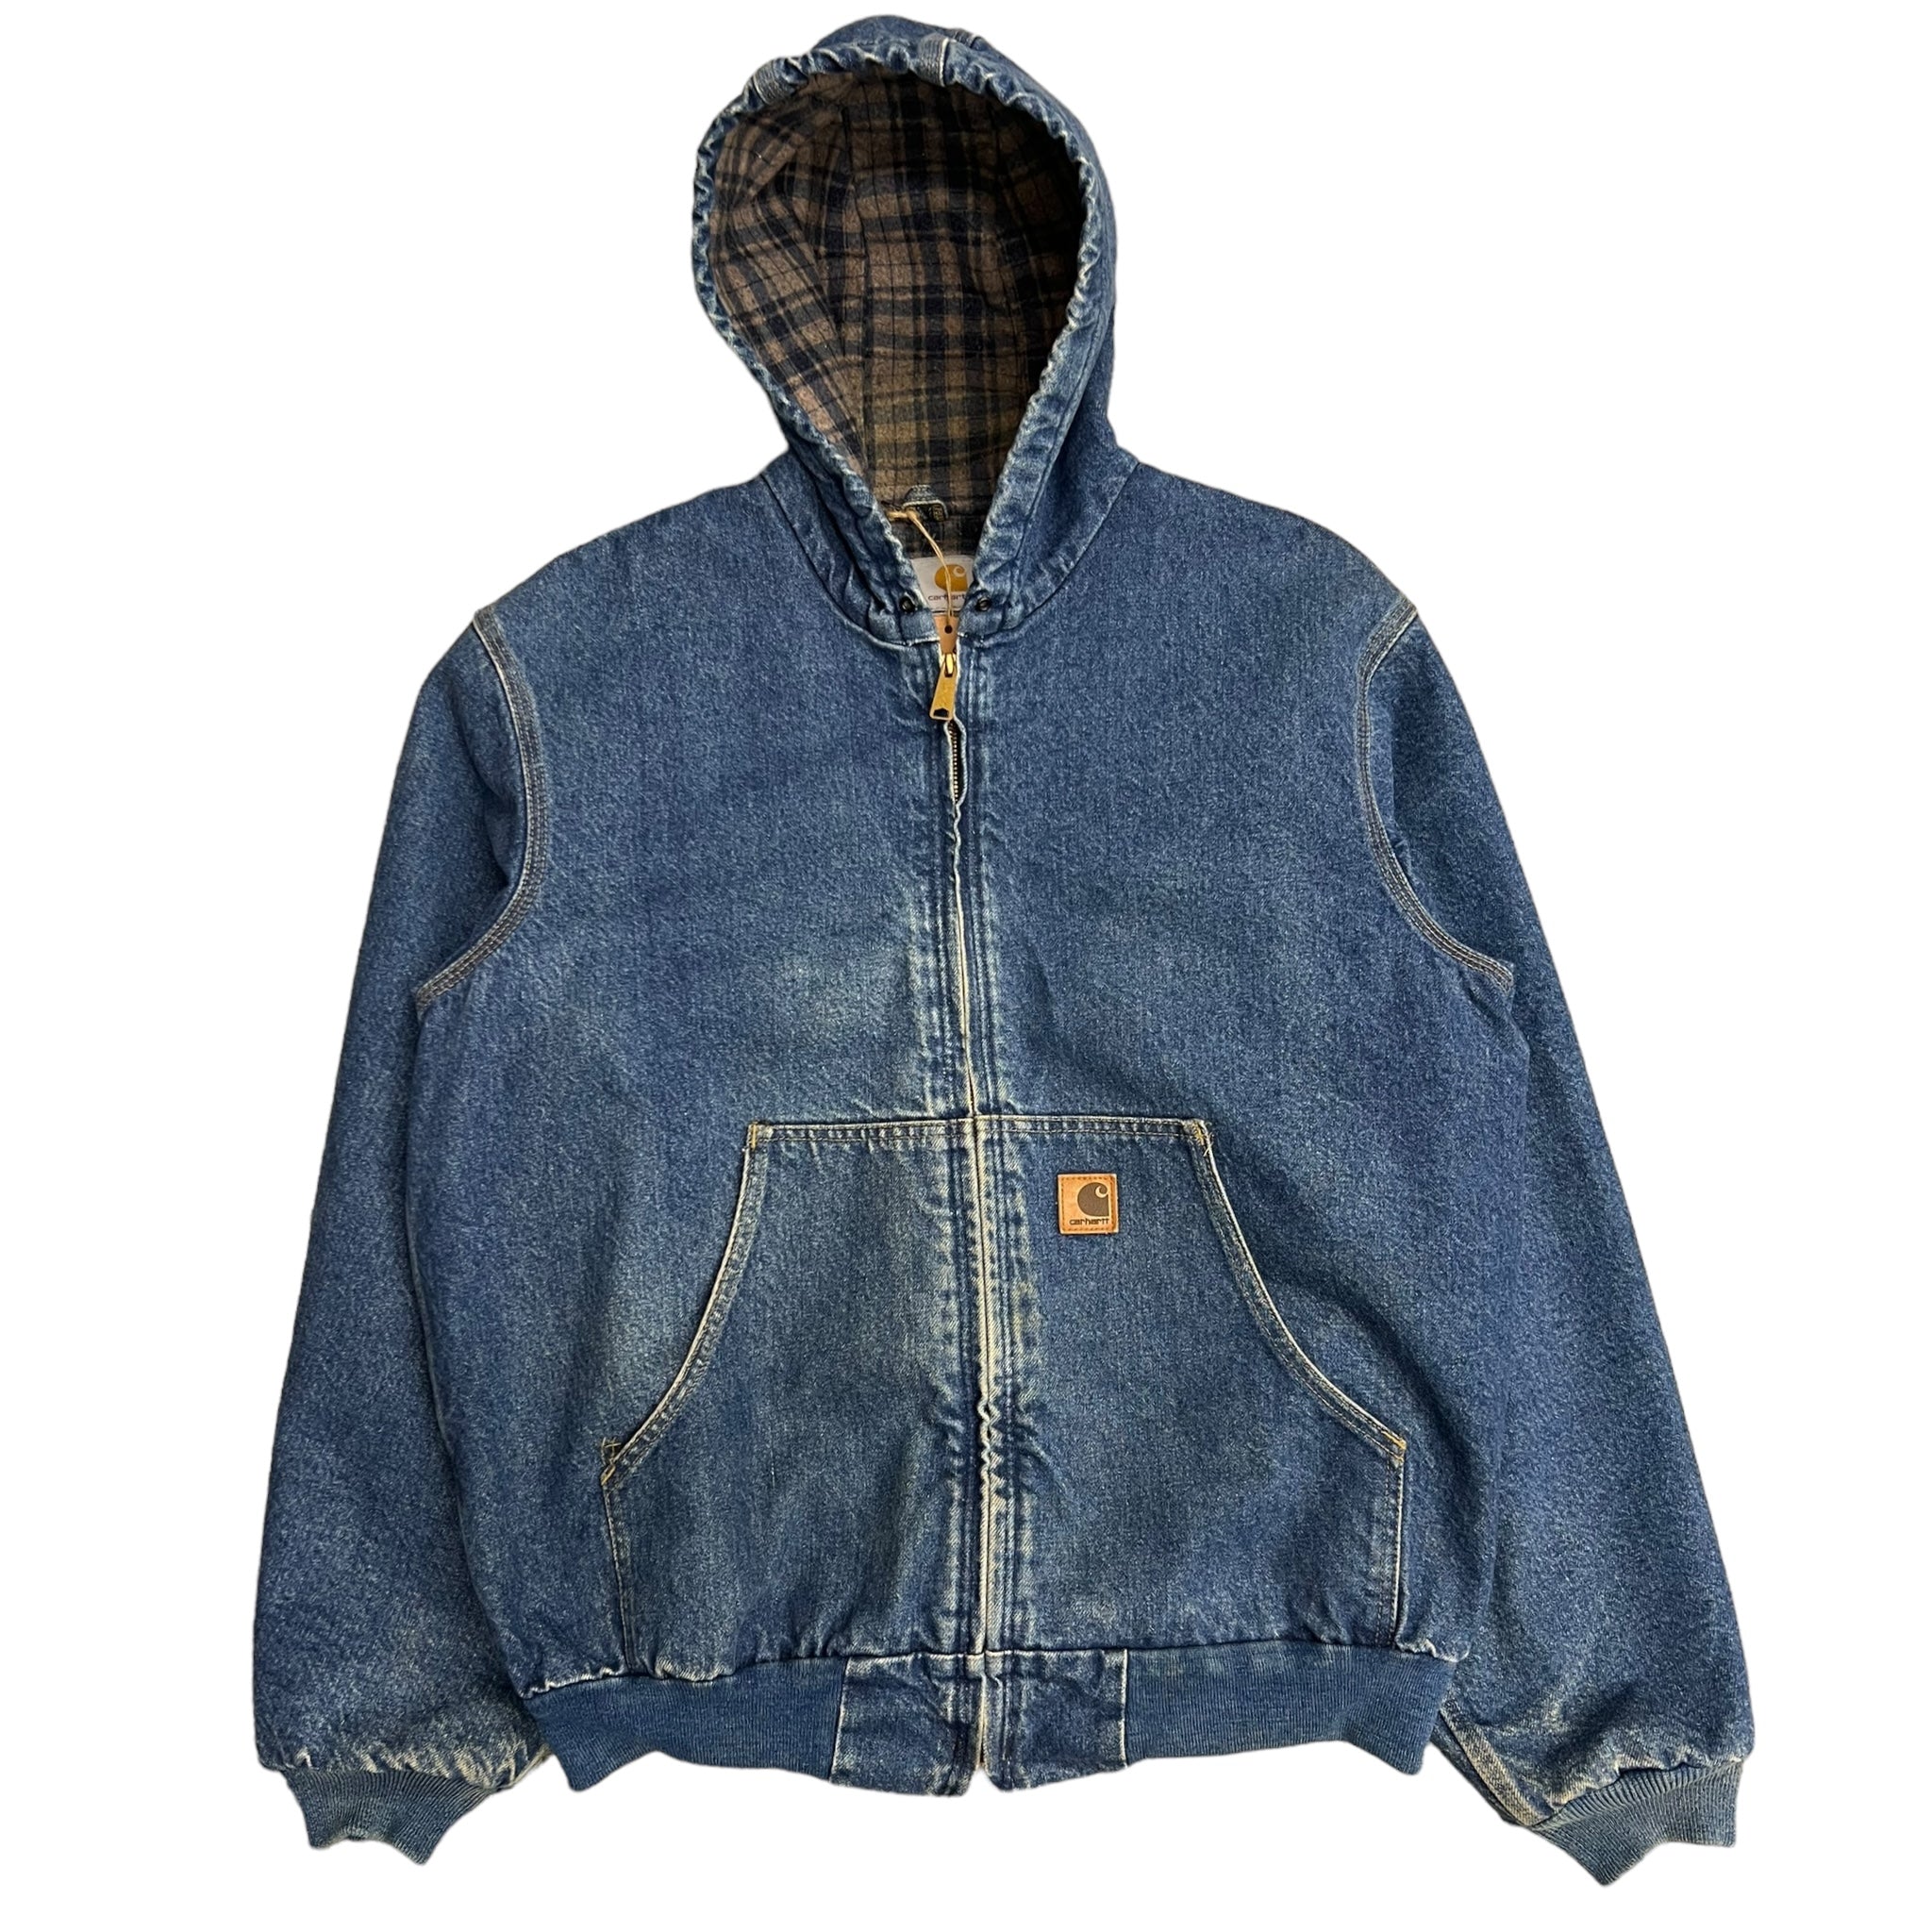 Buy SpyBy Full Sleeves Solid Washed Denim Hooded Jacket Blue for Boys  (11-12Years) Online in India, Shop at FirstCry.com - 12646935